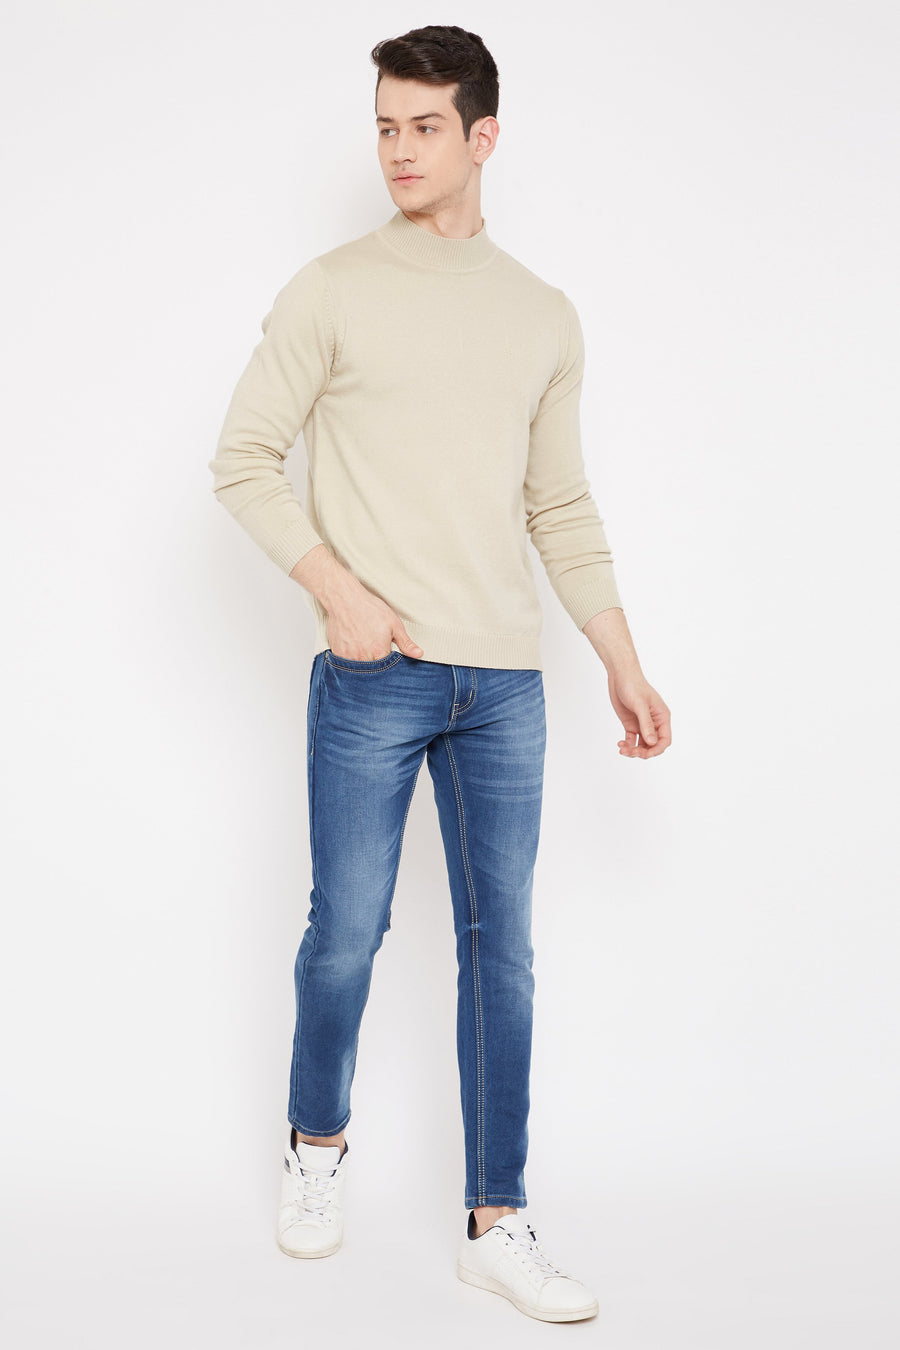 Camla Men Fawn Color Solid Sweater